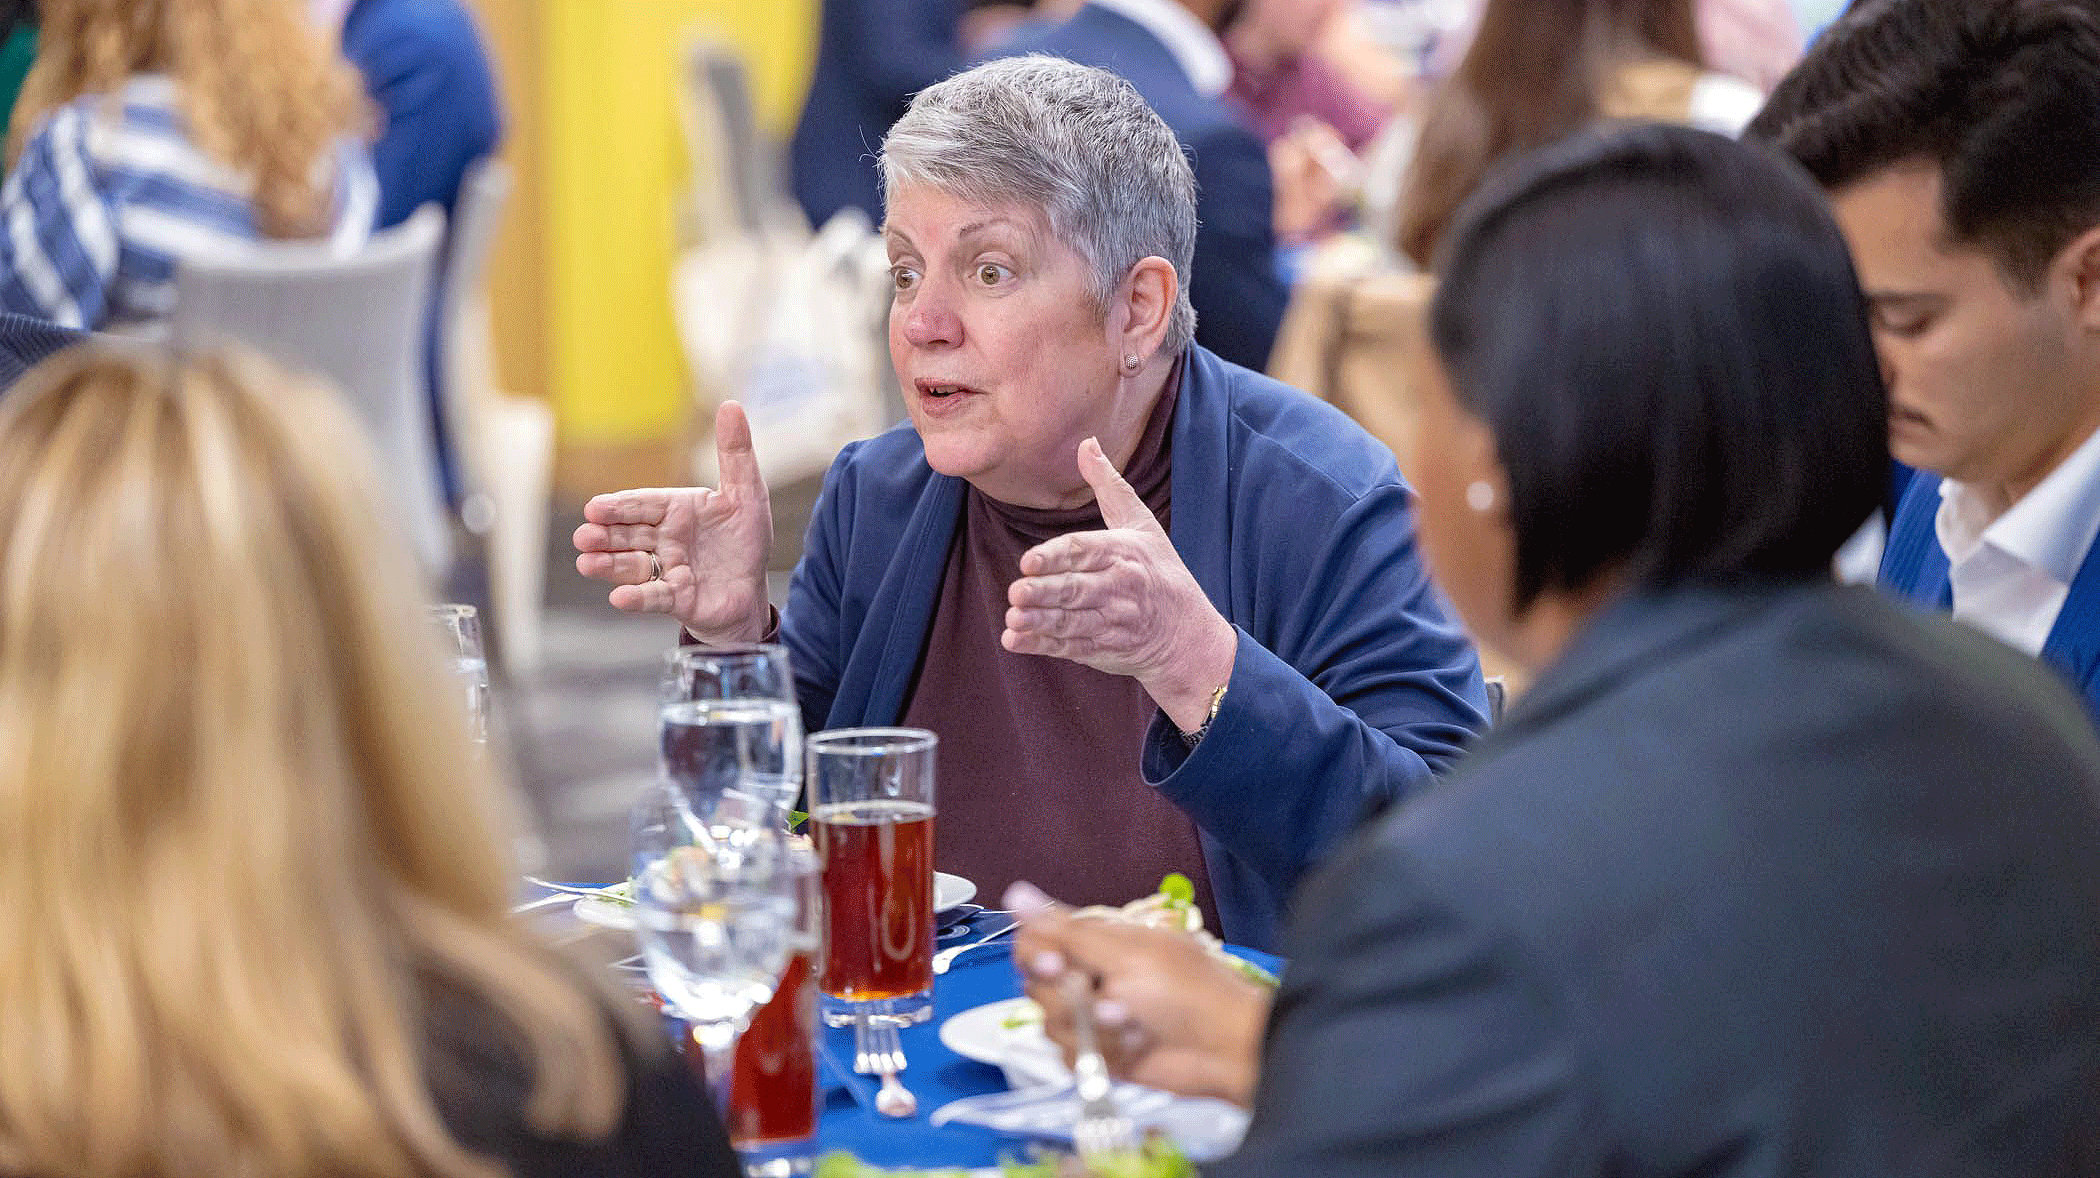 Janet Napolitano, a prominent U.S. national security expert now at UC Berkeley, talks with students and others during the 